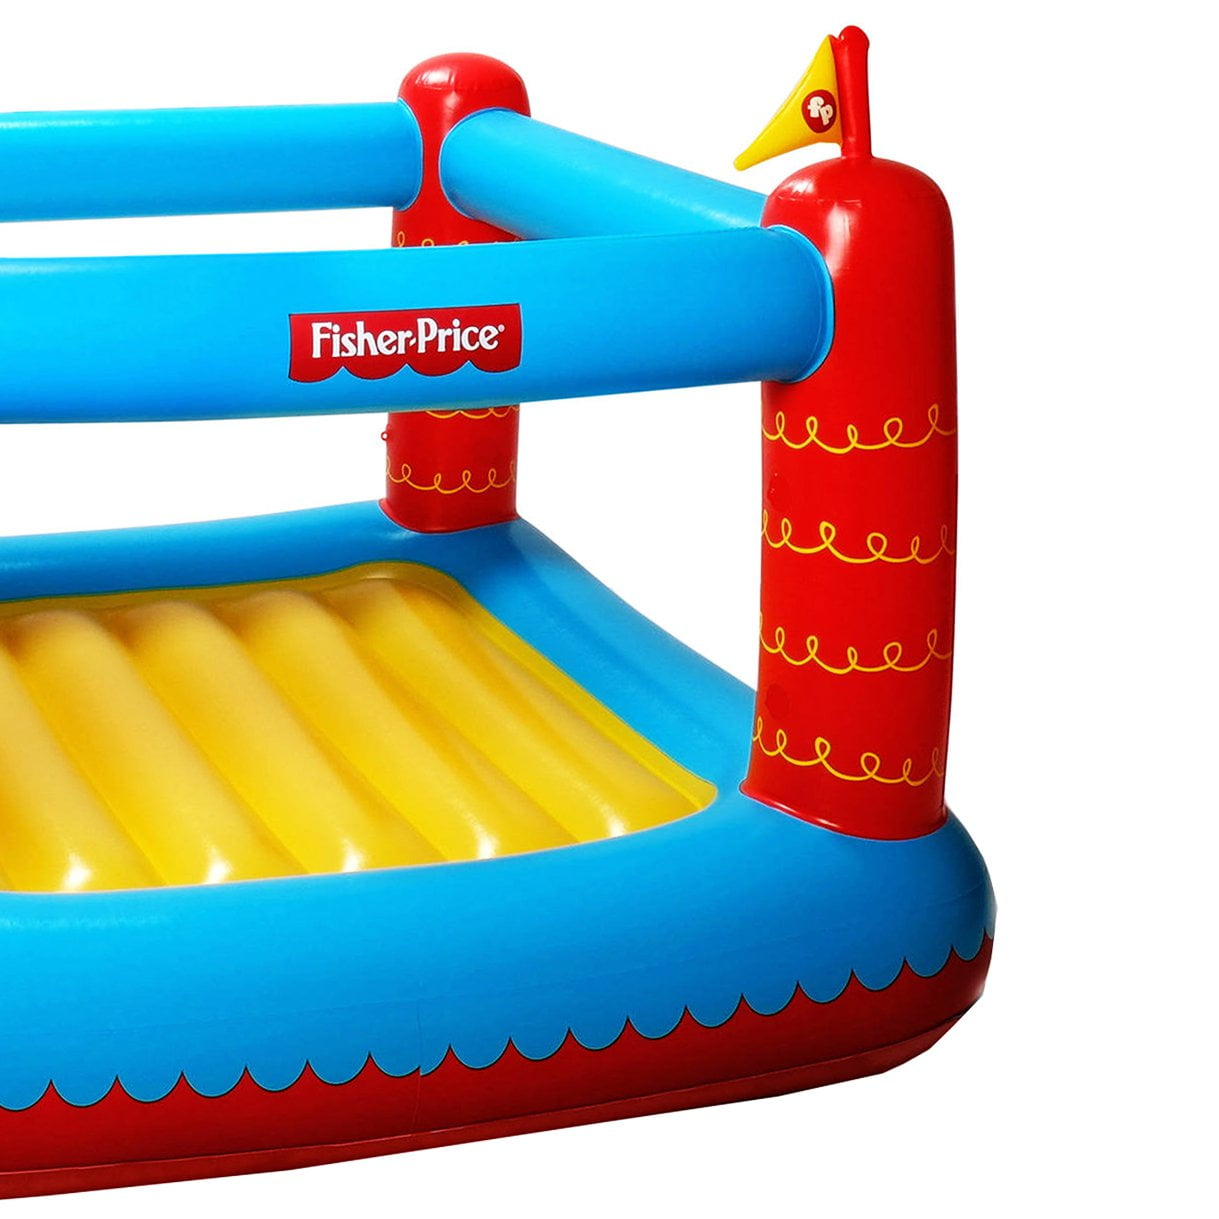 Hop And Leap with The Bouncetastic Bouncy Castle YXS Childrens Inflatable Bouncy Castle,Give Inflatable Equipment,Jump